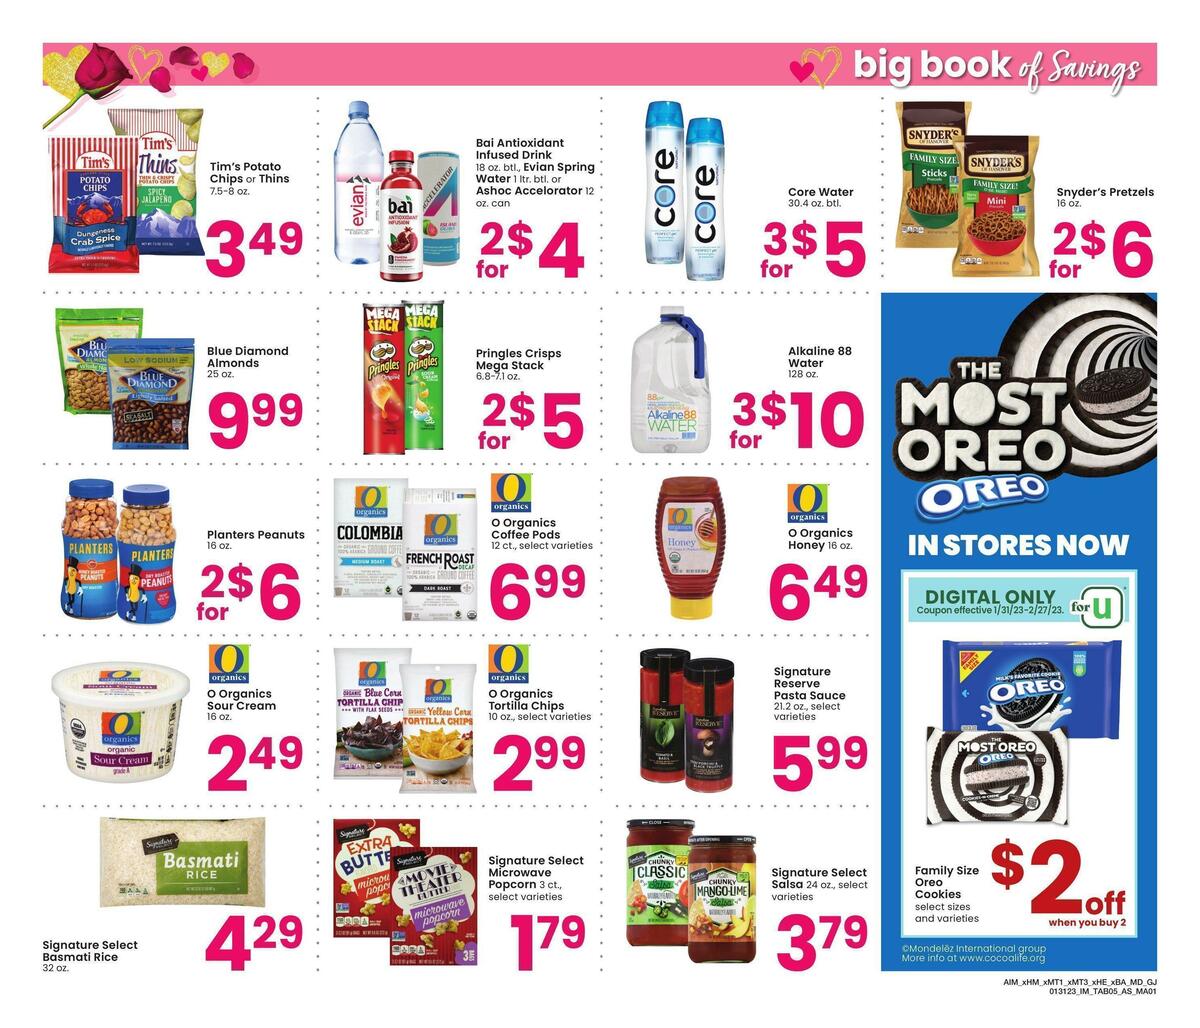 Albertsons Big Book of Savings Weekly Ad from January 31